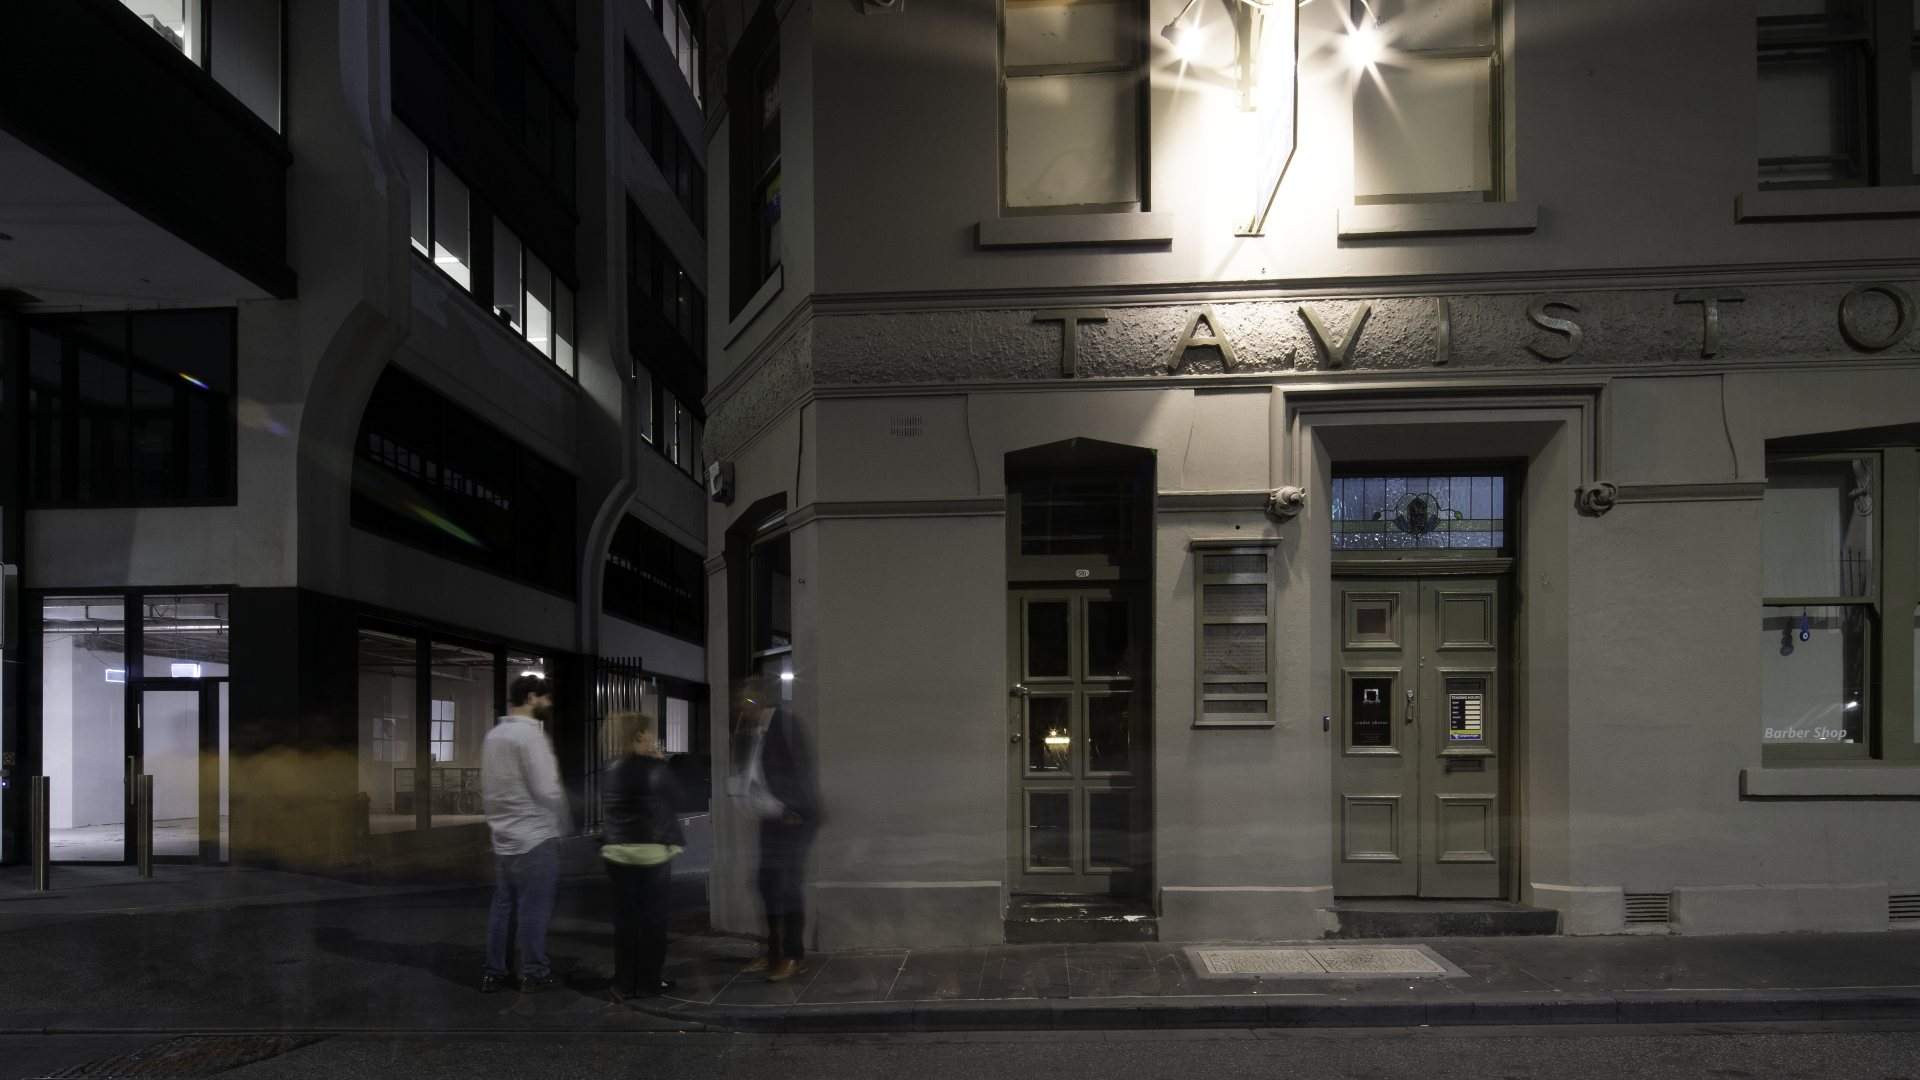 Yarra Falls Is the Tiny CBD Bar Inspired by a Little Known Piece of Melbourne History